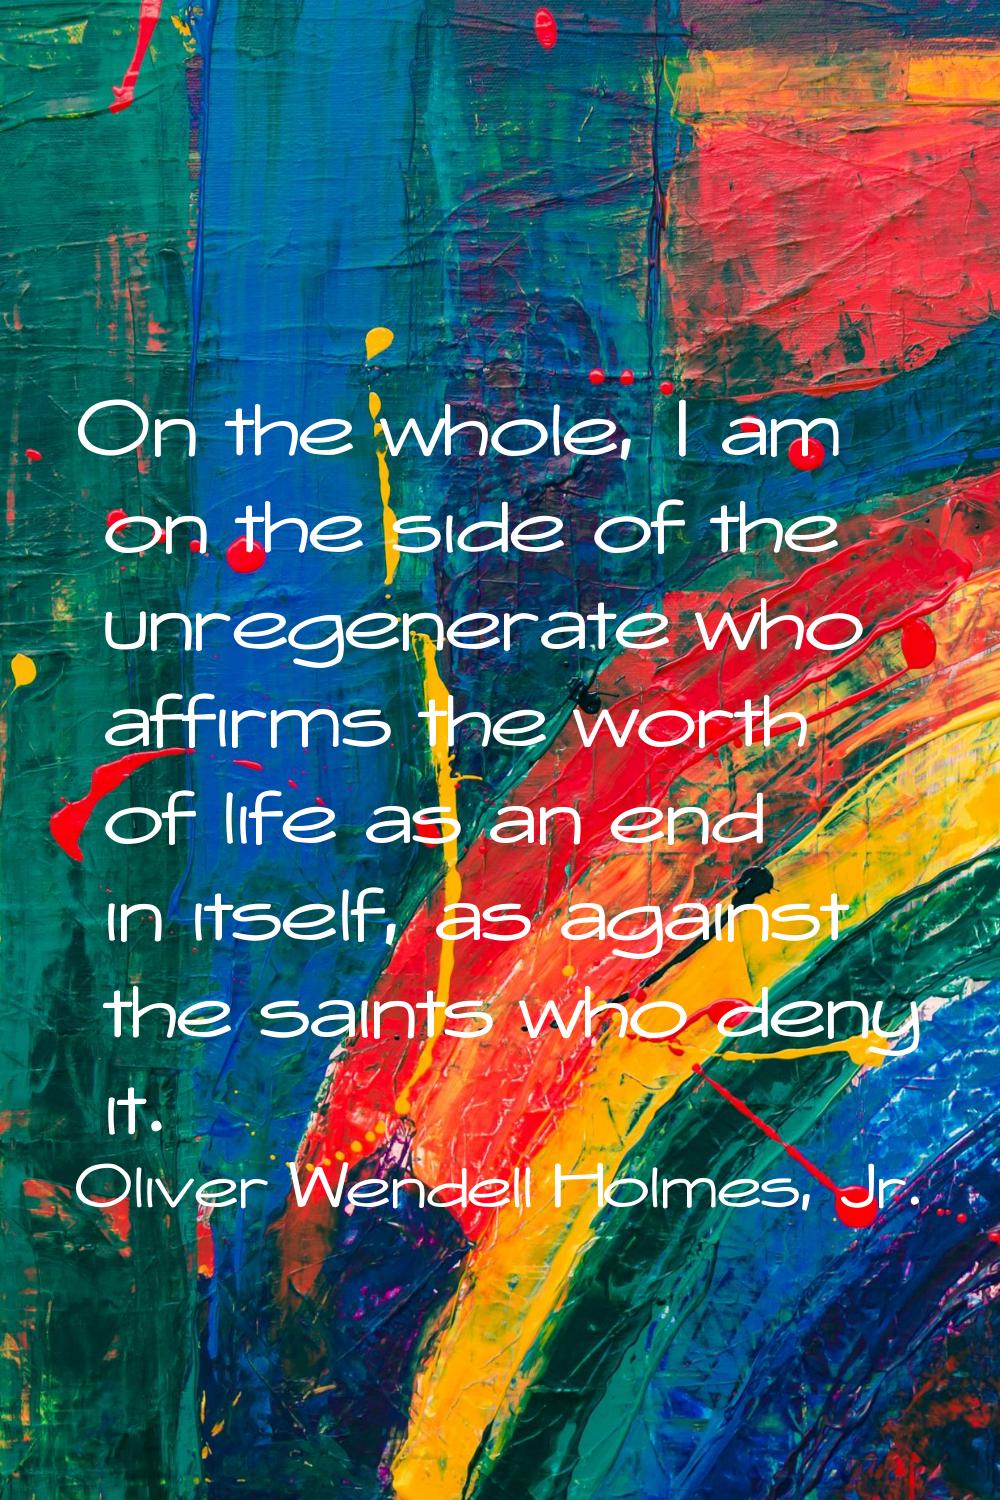 On the whole, I am on the side of the unregenerate who affirms the worth of life as an end in itsel